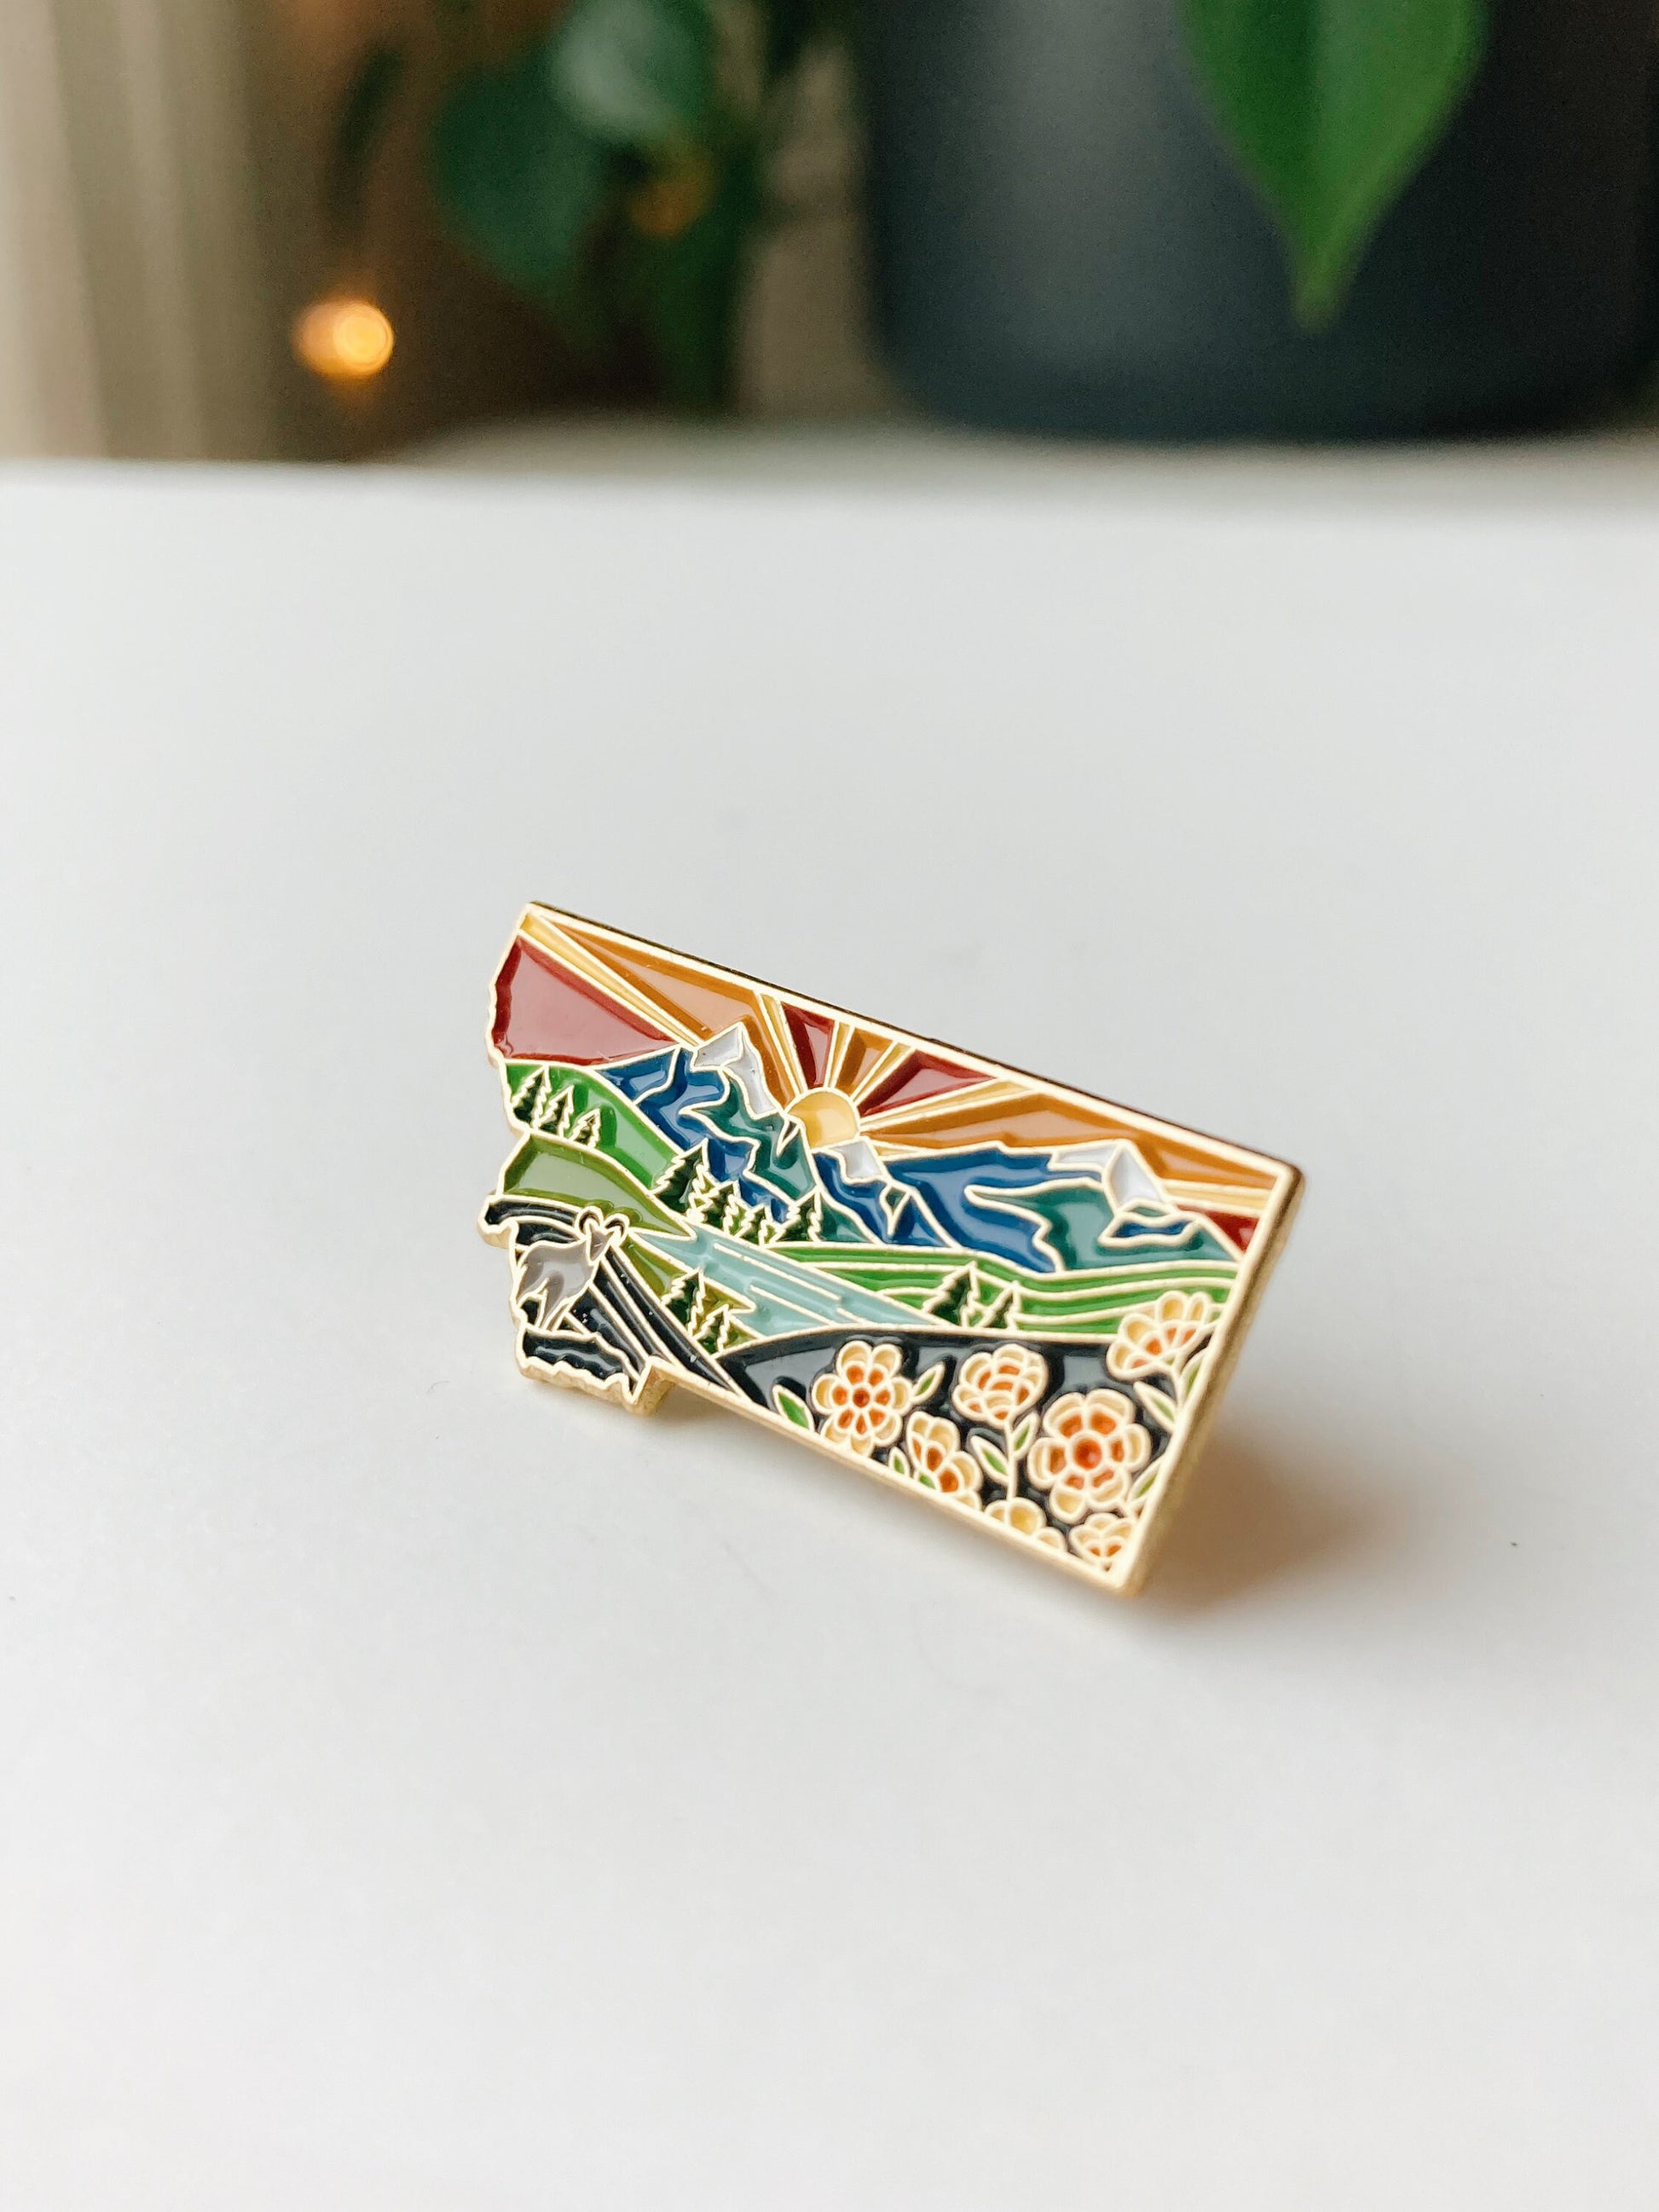 Montana Enamel Pin | Gold Soft Enamel Pin | Illustrated United States Pin | Butterfly Clasp | 1.25"